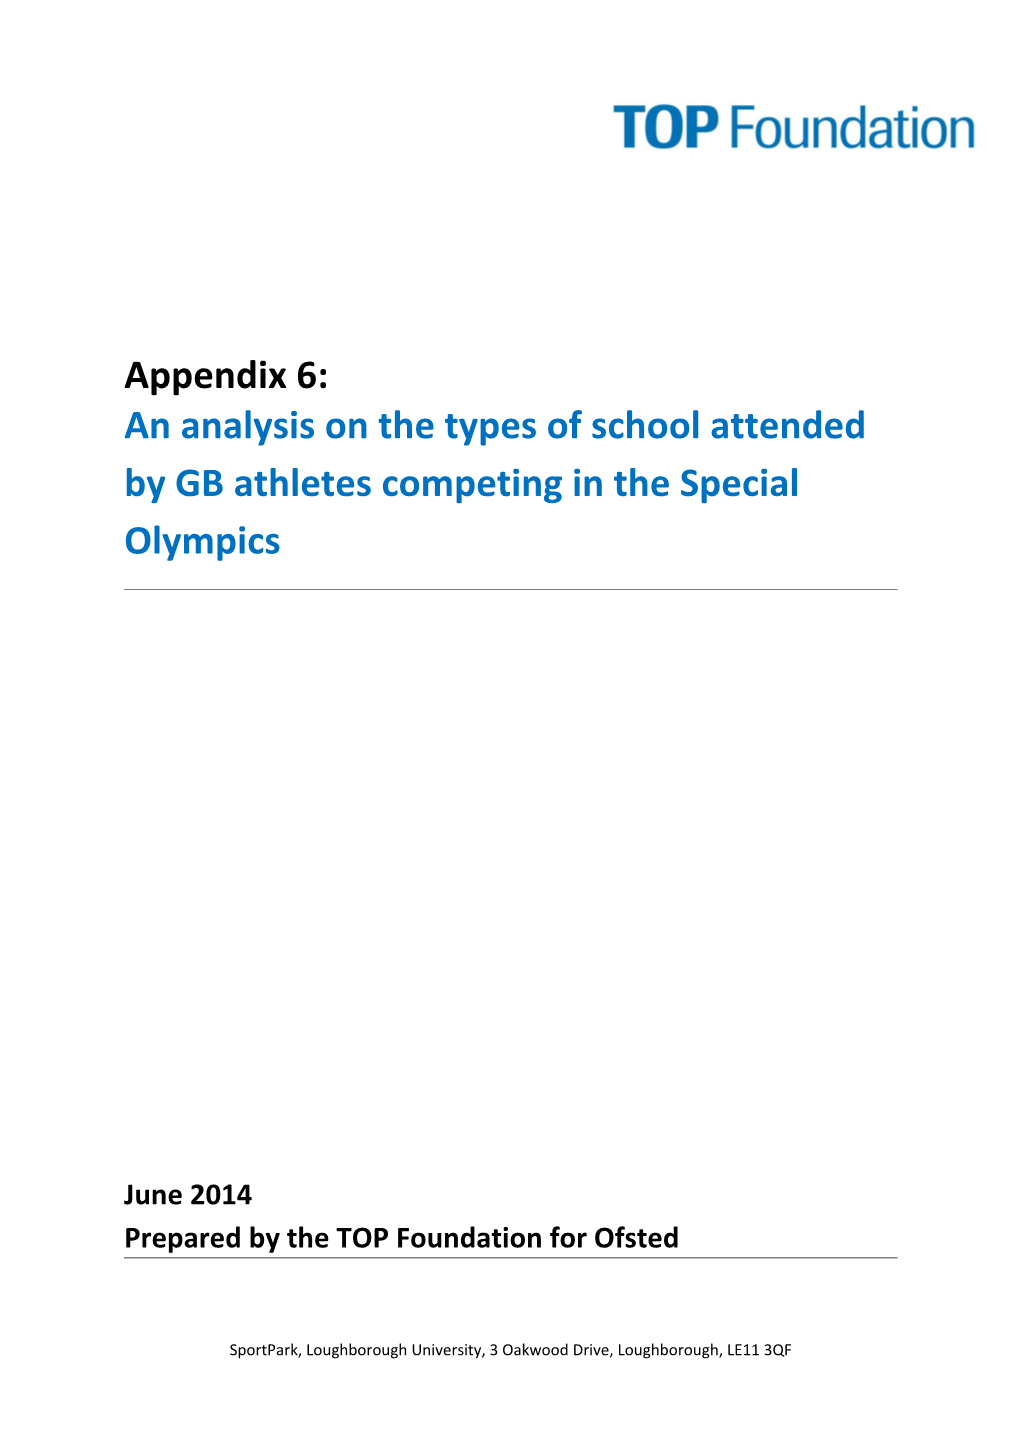 An Analysis on the Types of School Attended by GB Athletes Competing in the Special Olympics